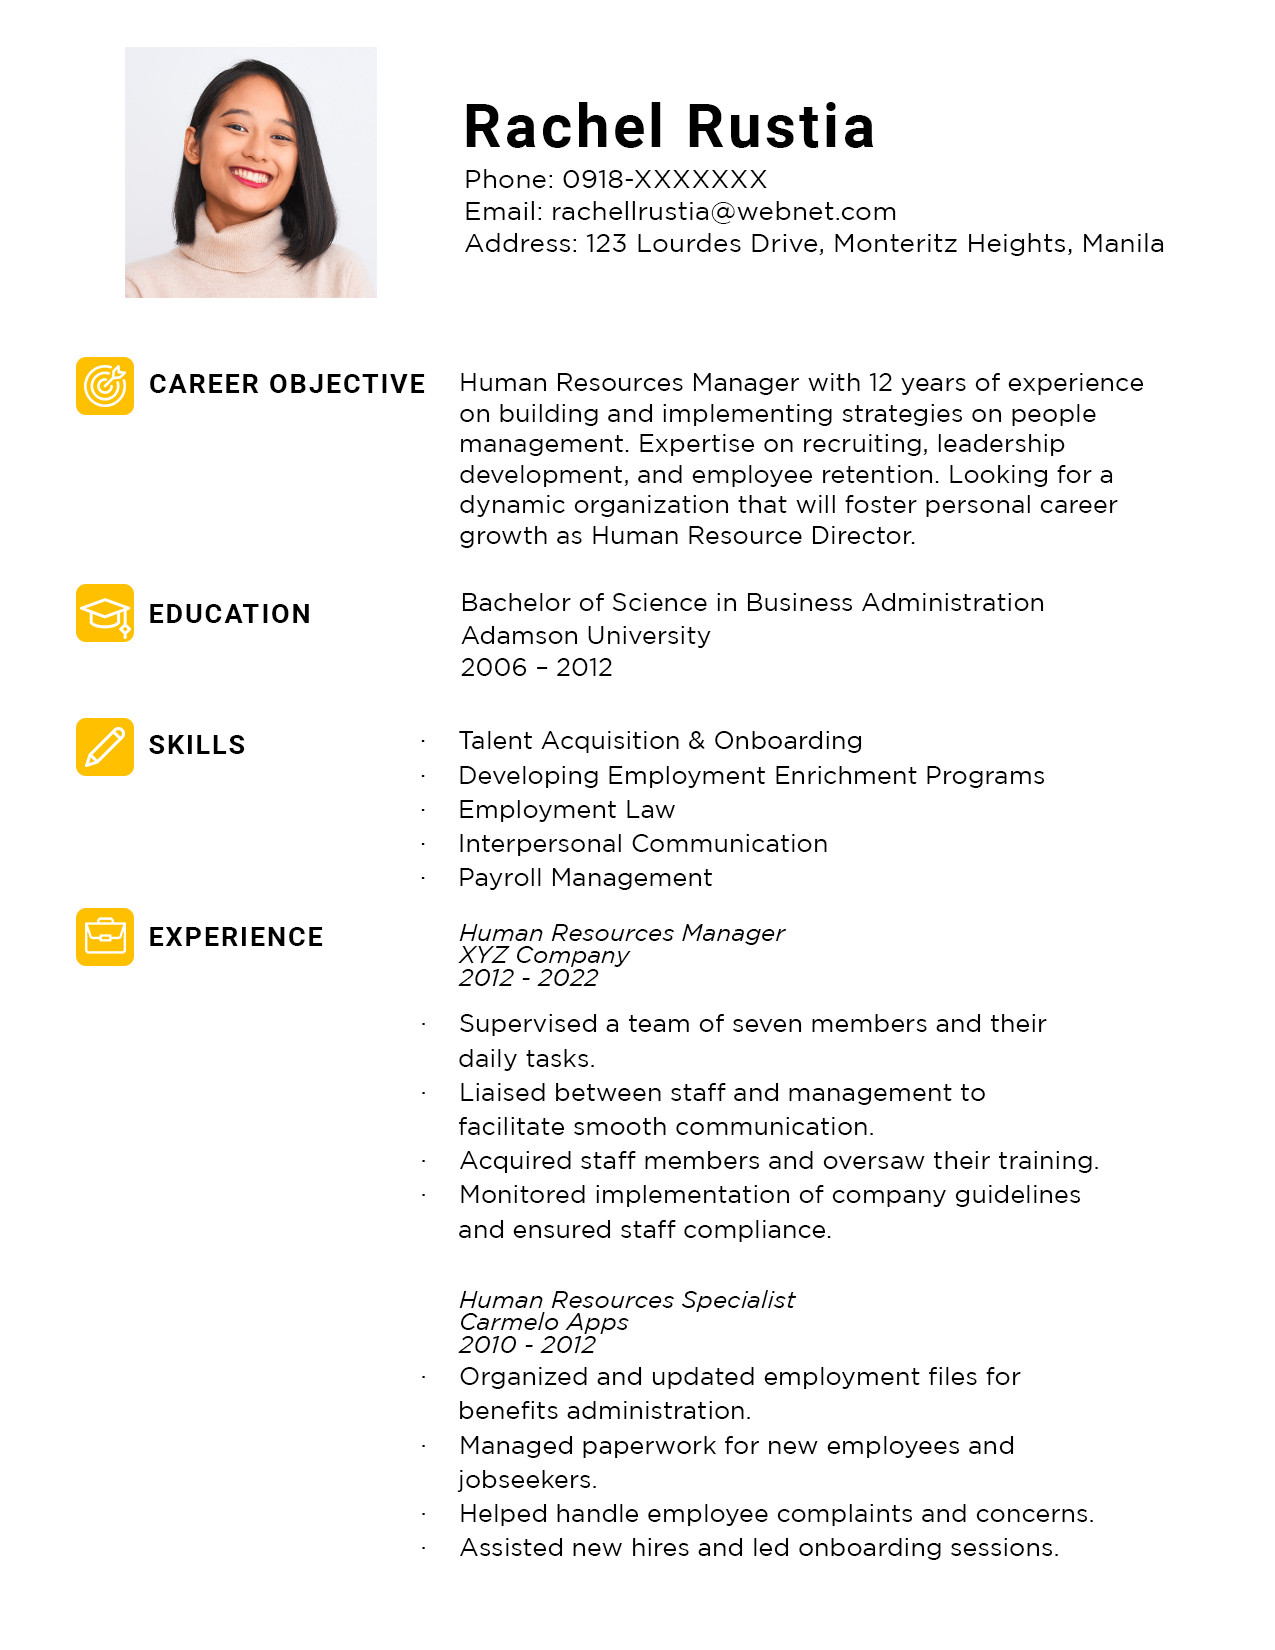 Cpa Resume Sample Entry Level Philippines Resume Templates You Can Download for Free!